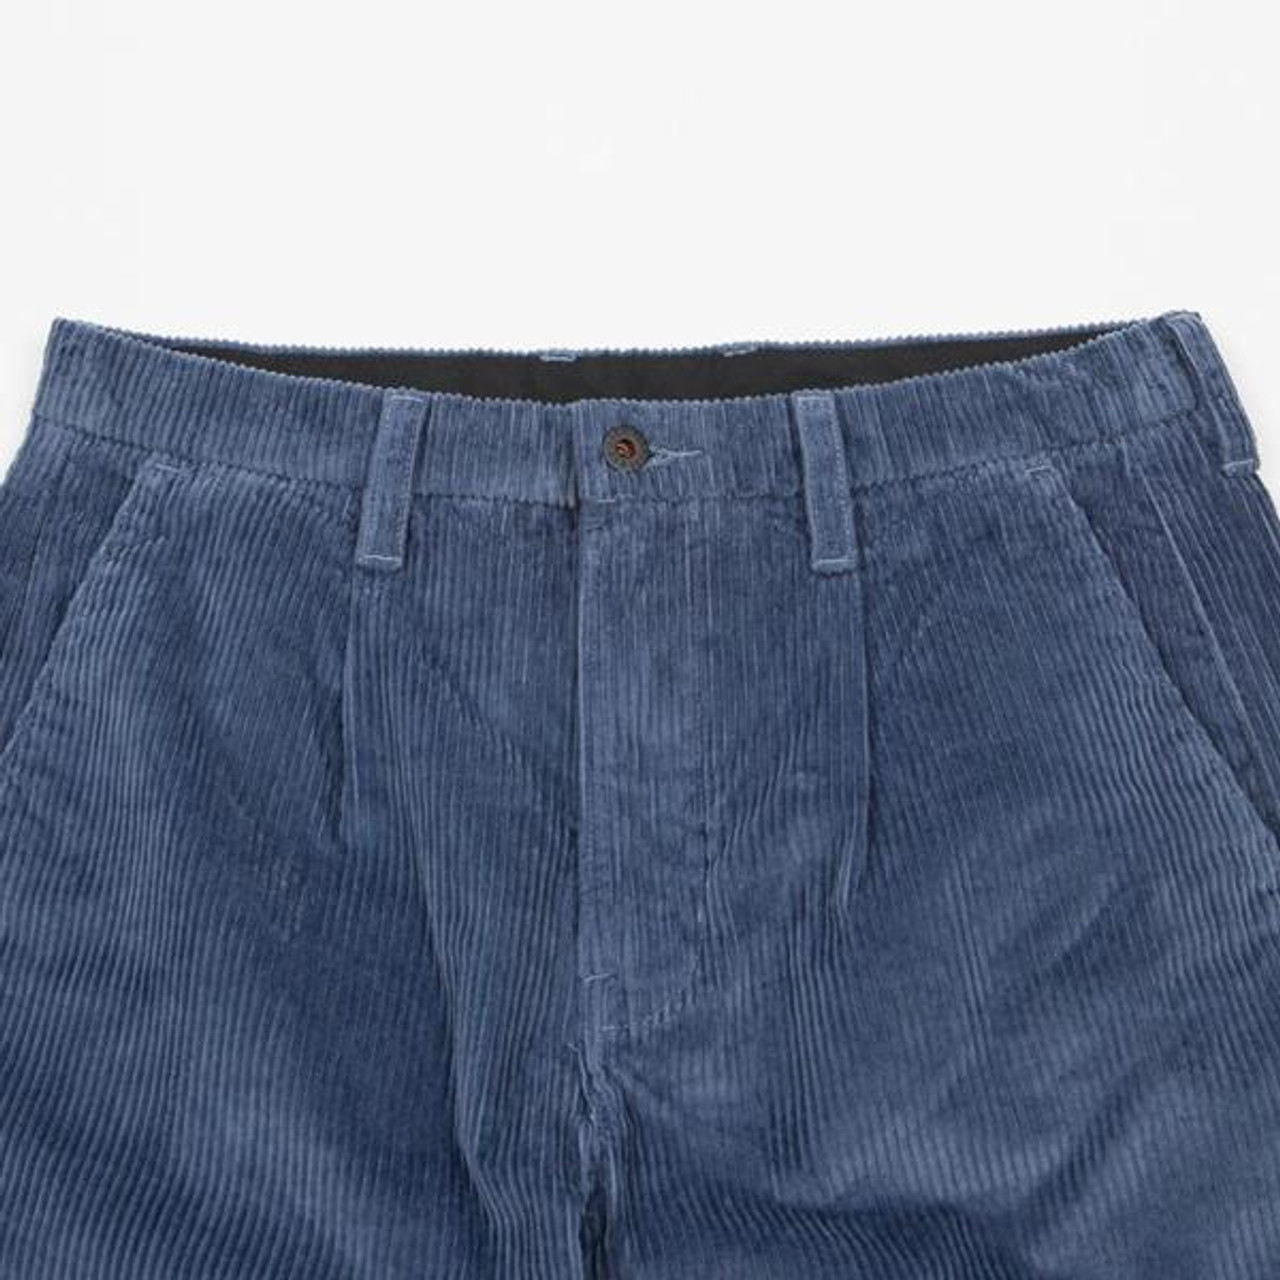 Levis Skate Pleated Trousers Blue Wide Cord